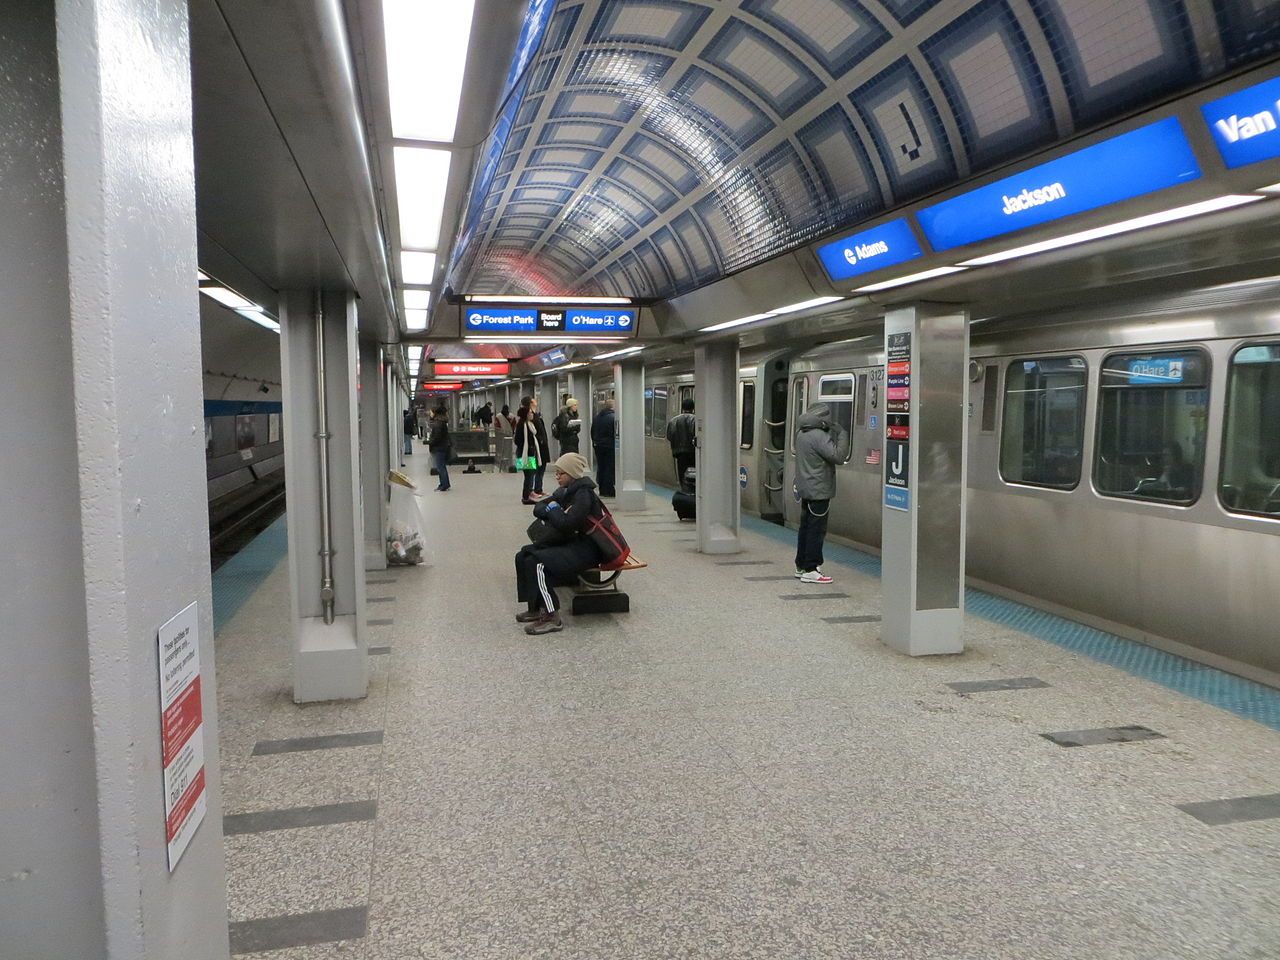 CTA Employee stabbed, CPD officer injured, during altercation on Blue Line at Jackson